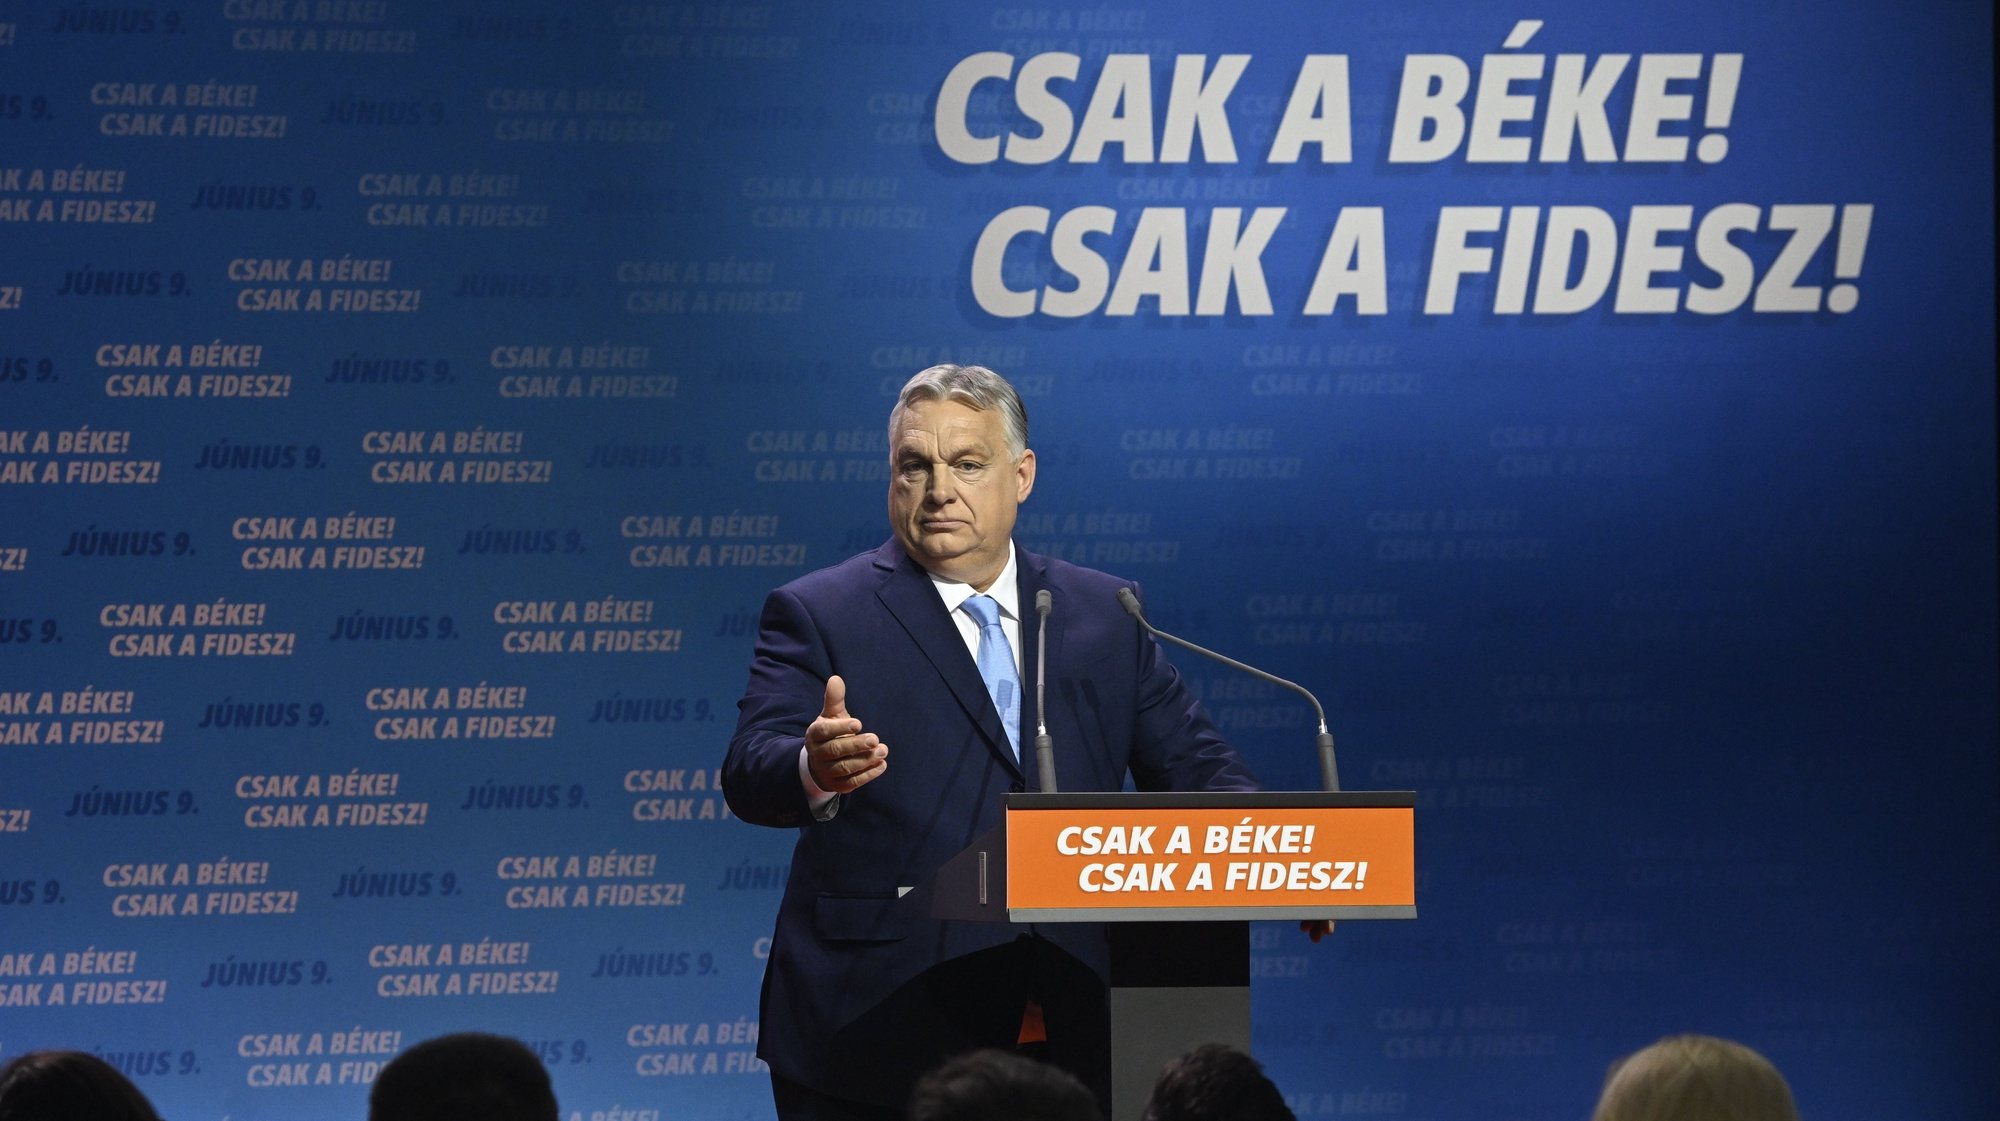 epa11288781 Hungarian Prime Minister and Chairman of Fidesz party Viktor Orban addresses a rally launching the campaign of the party for the European Parliamentary and the local elections in Budapest, Hungary, 19 April 2024. The inscription readPeace only! Fidesz only!  EPA/Szilard Koszticsak HUNGARY OUT